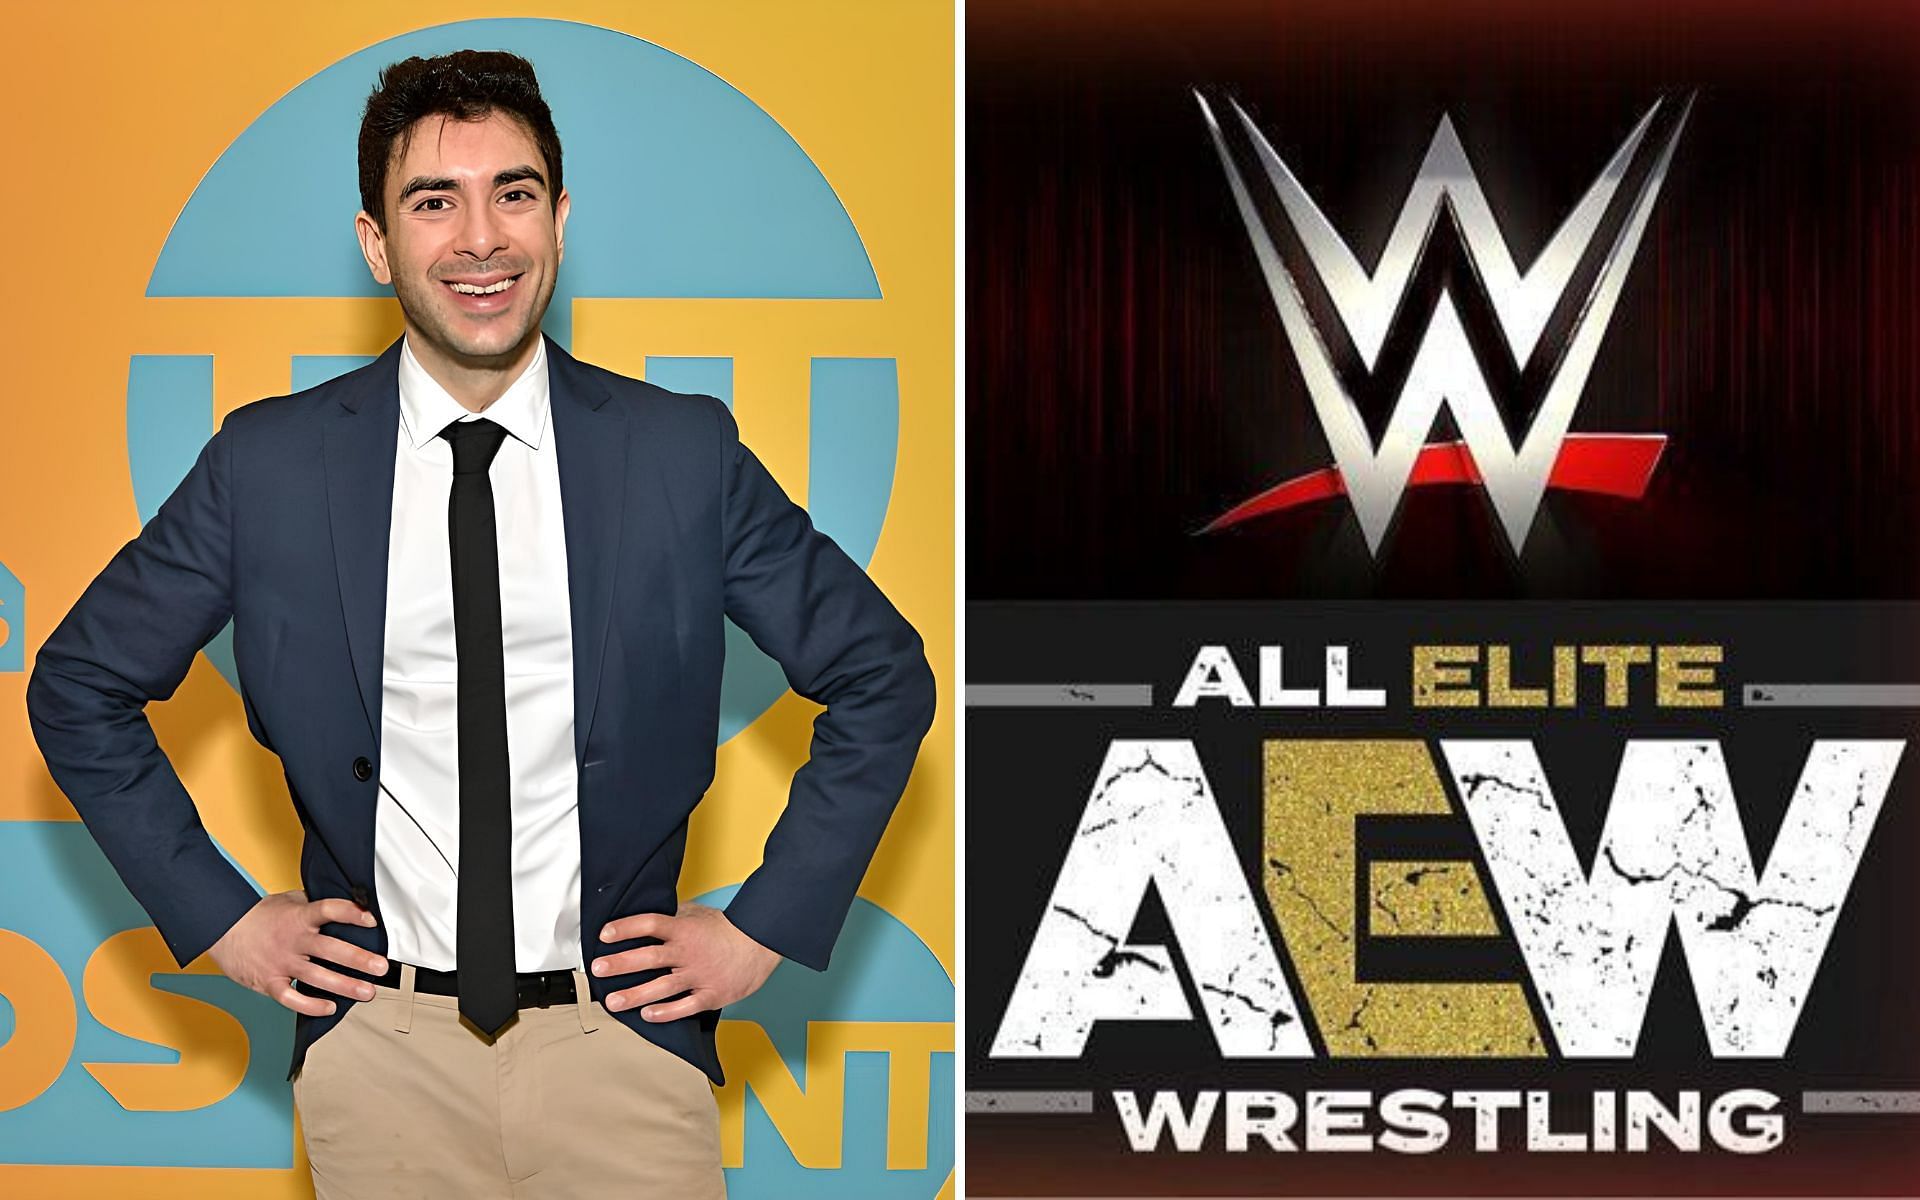 Tony Khan signs another ex-WWE performer